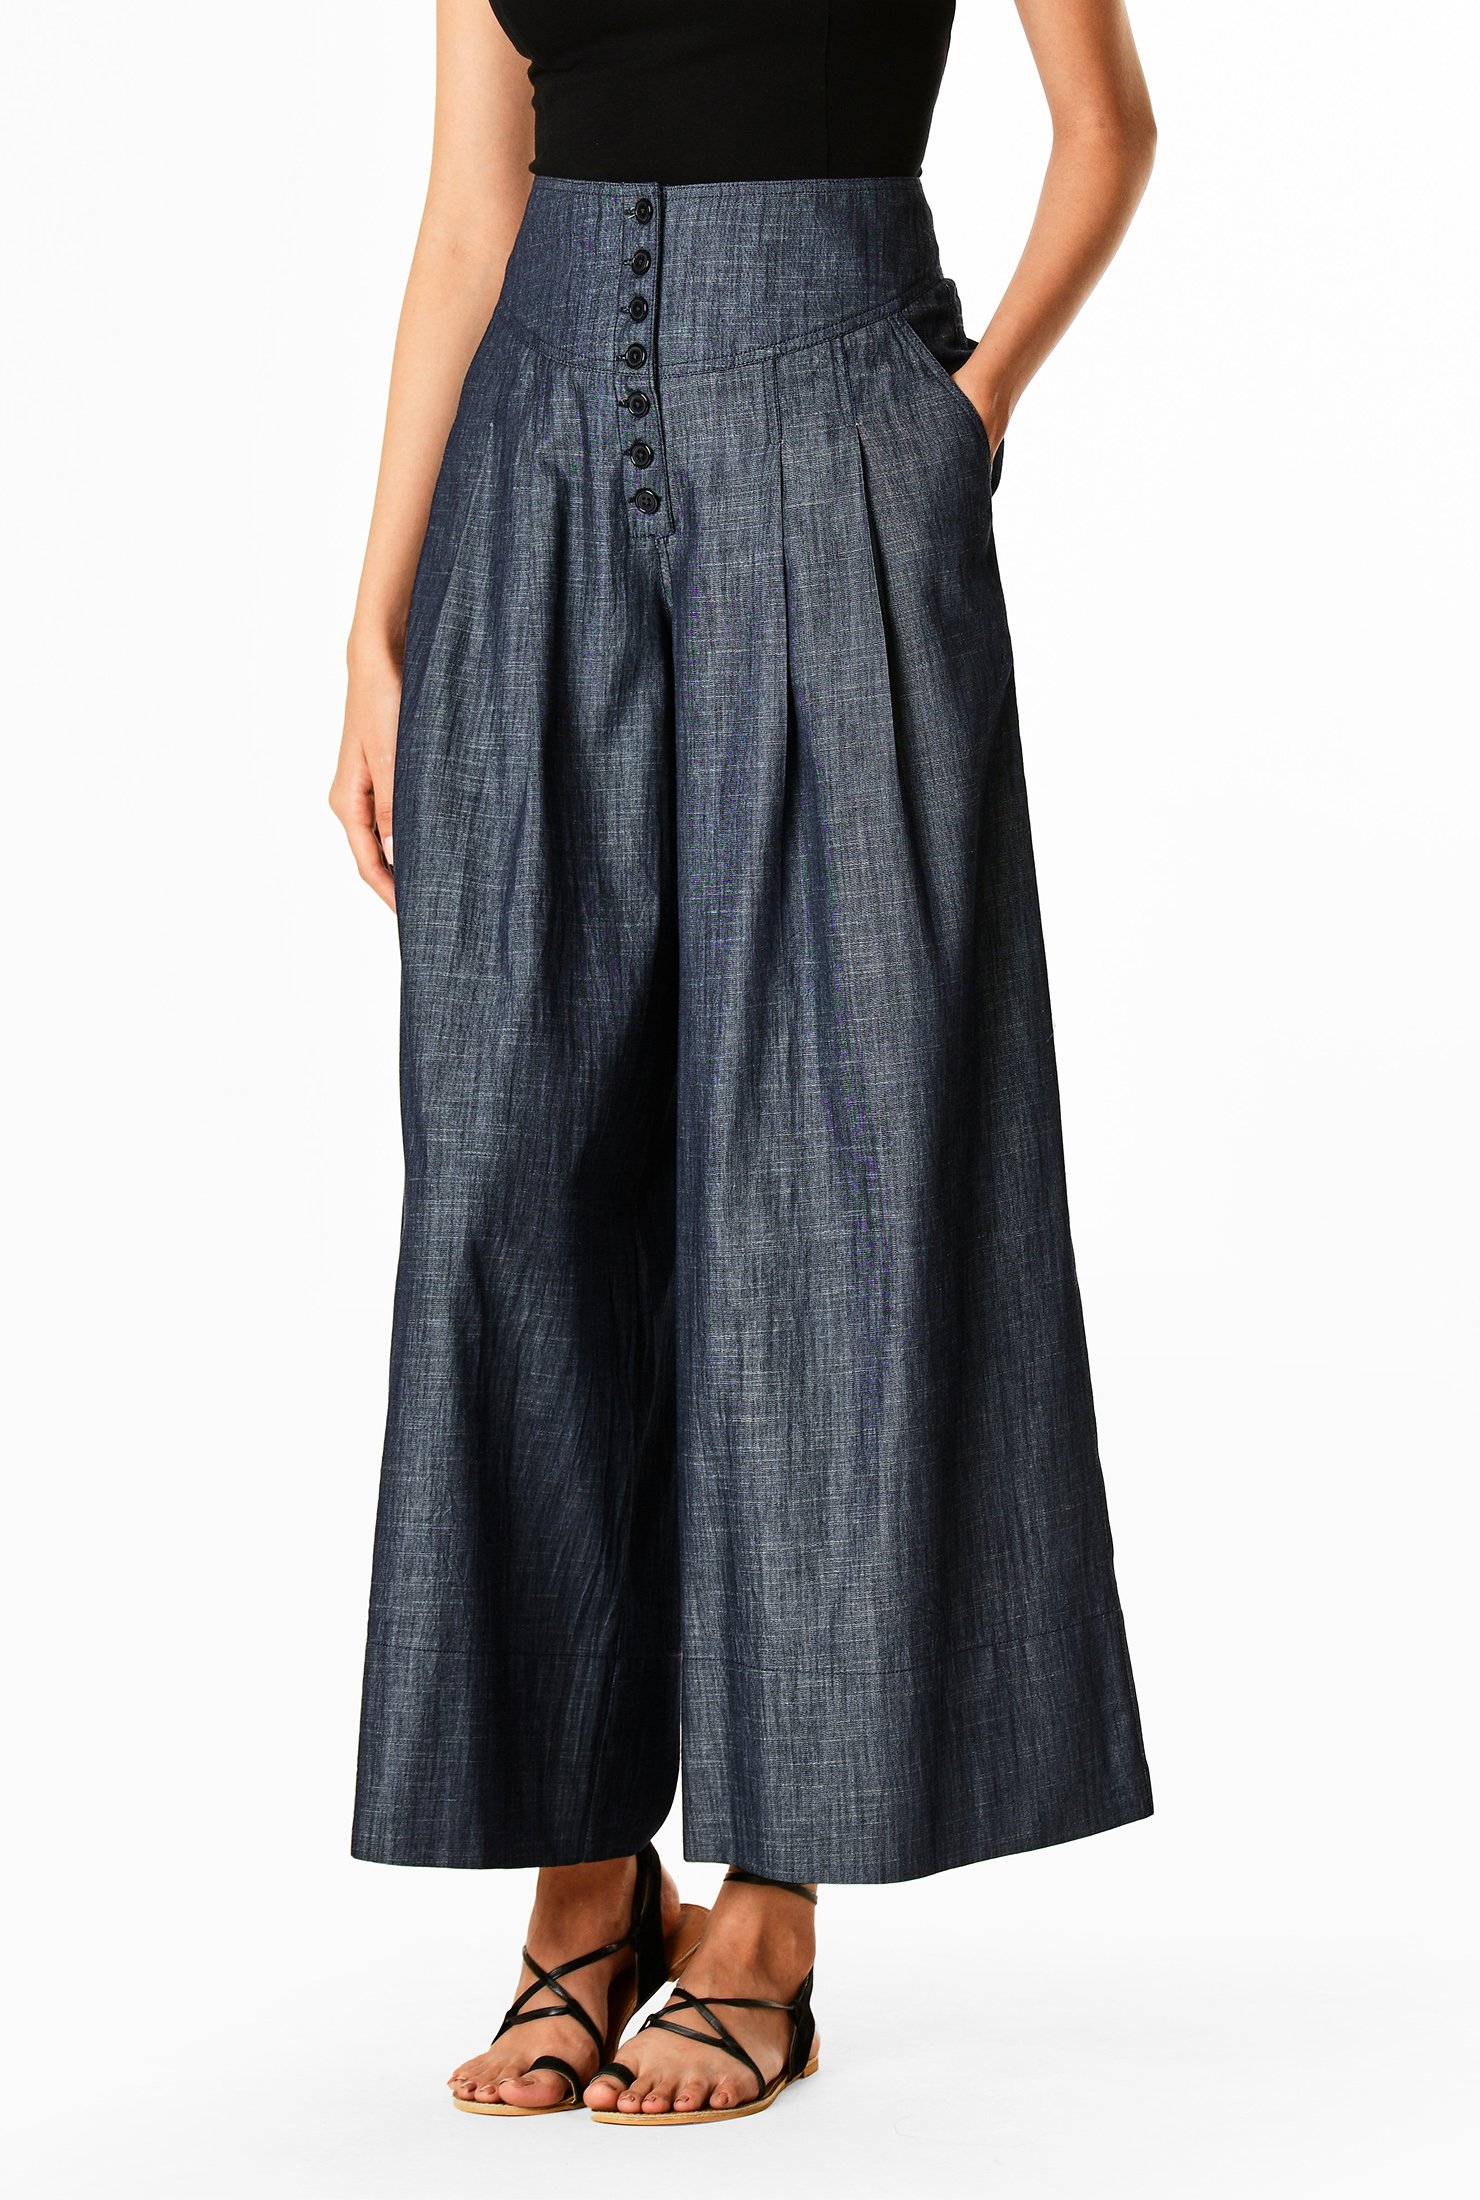 Button Front Cotton Chambray Palazzo Pants Women S Clothing 0